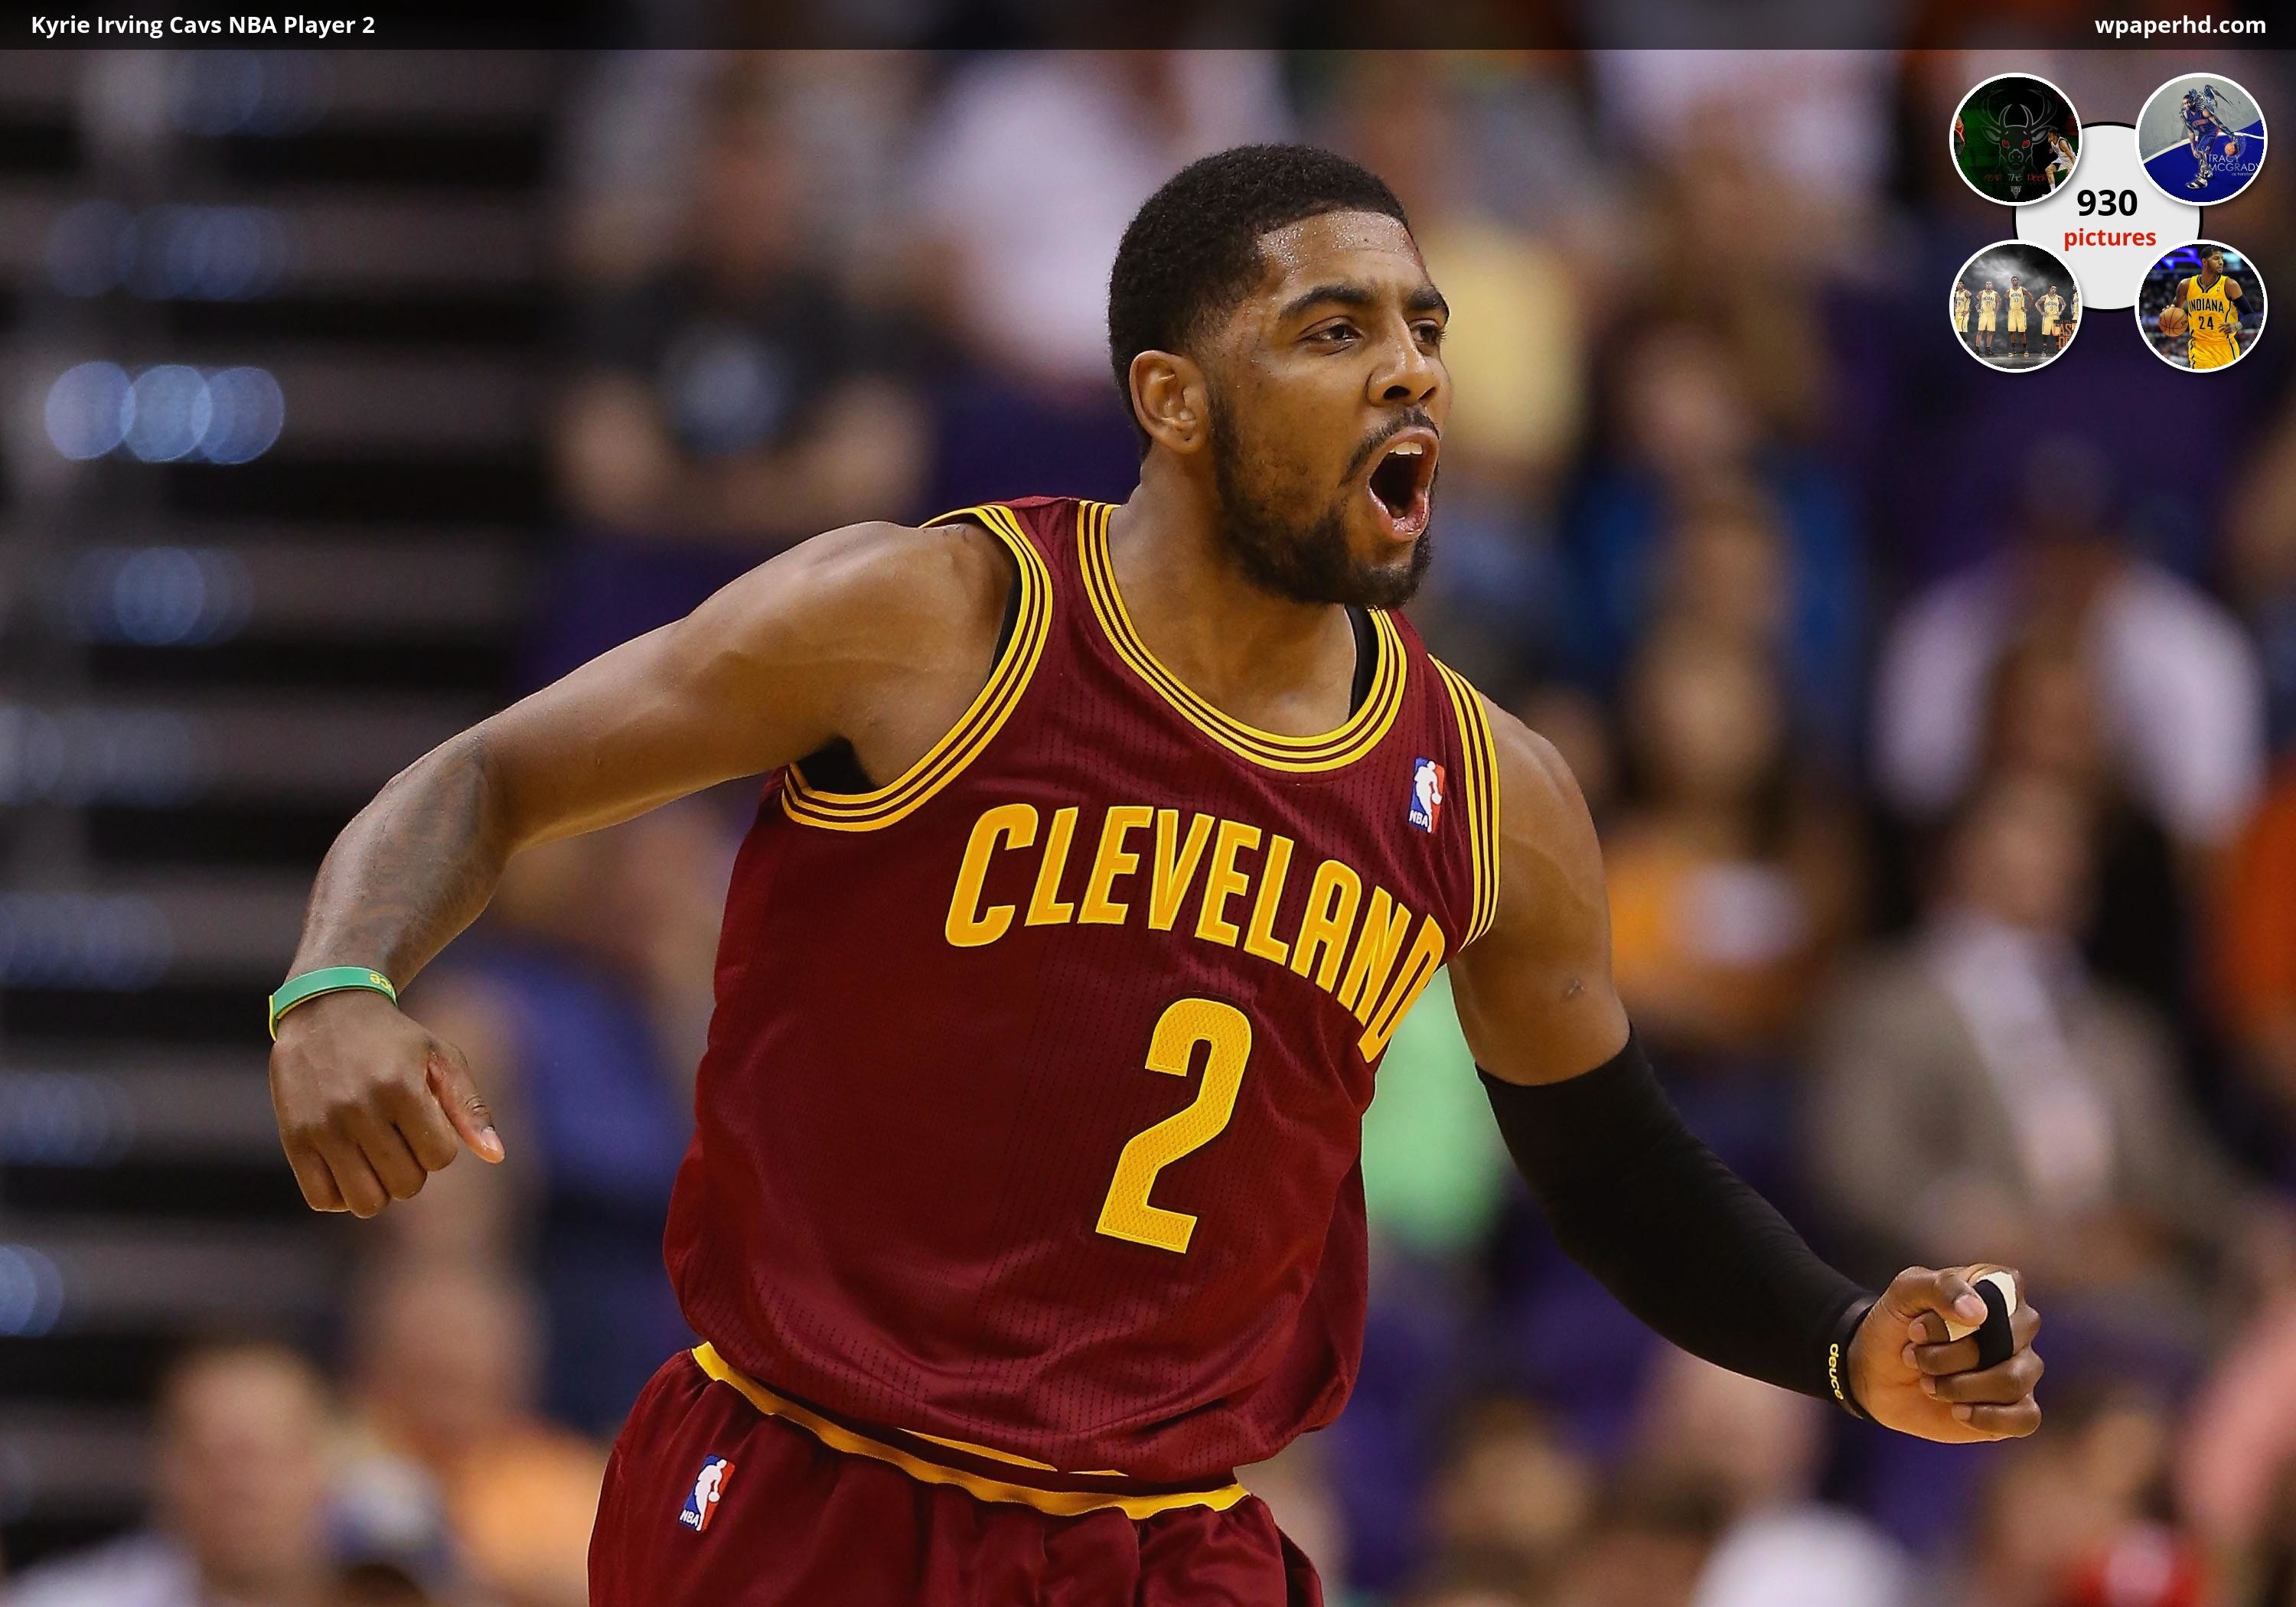 3000x2100 You are on page with Kyrie Irving Cavs NBA Player 2 wallpaper, where you  can download this picture in Original size and ...